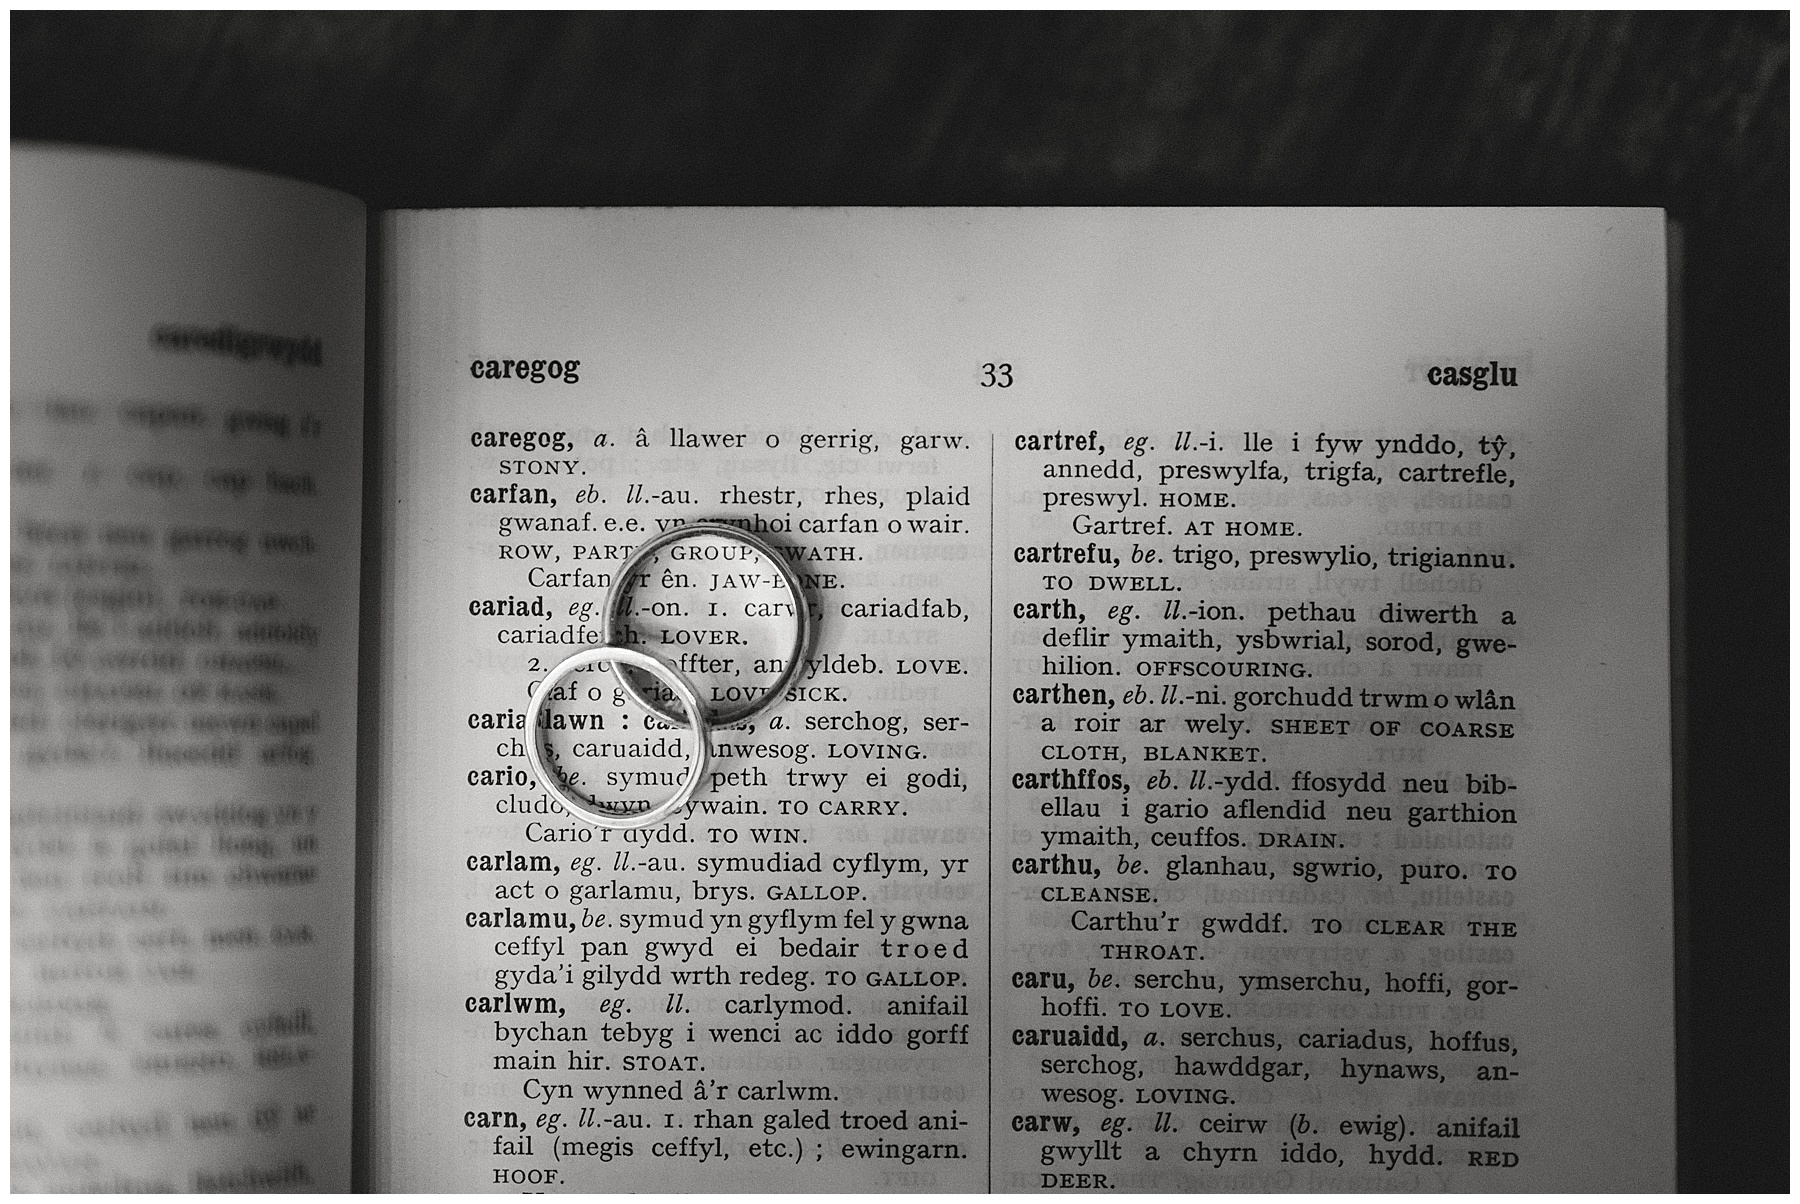 Wedding Rings Photographed In Dictionary